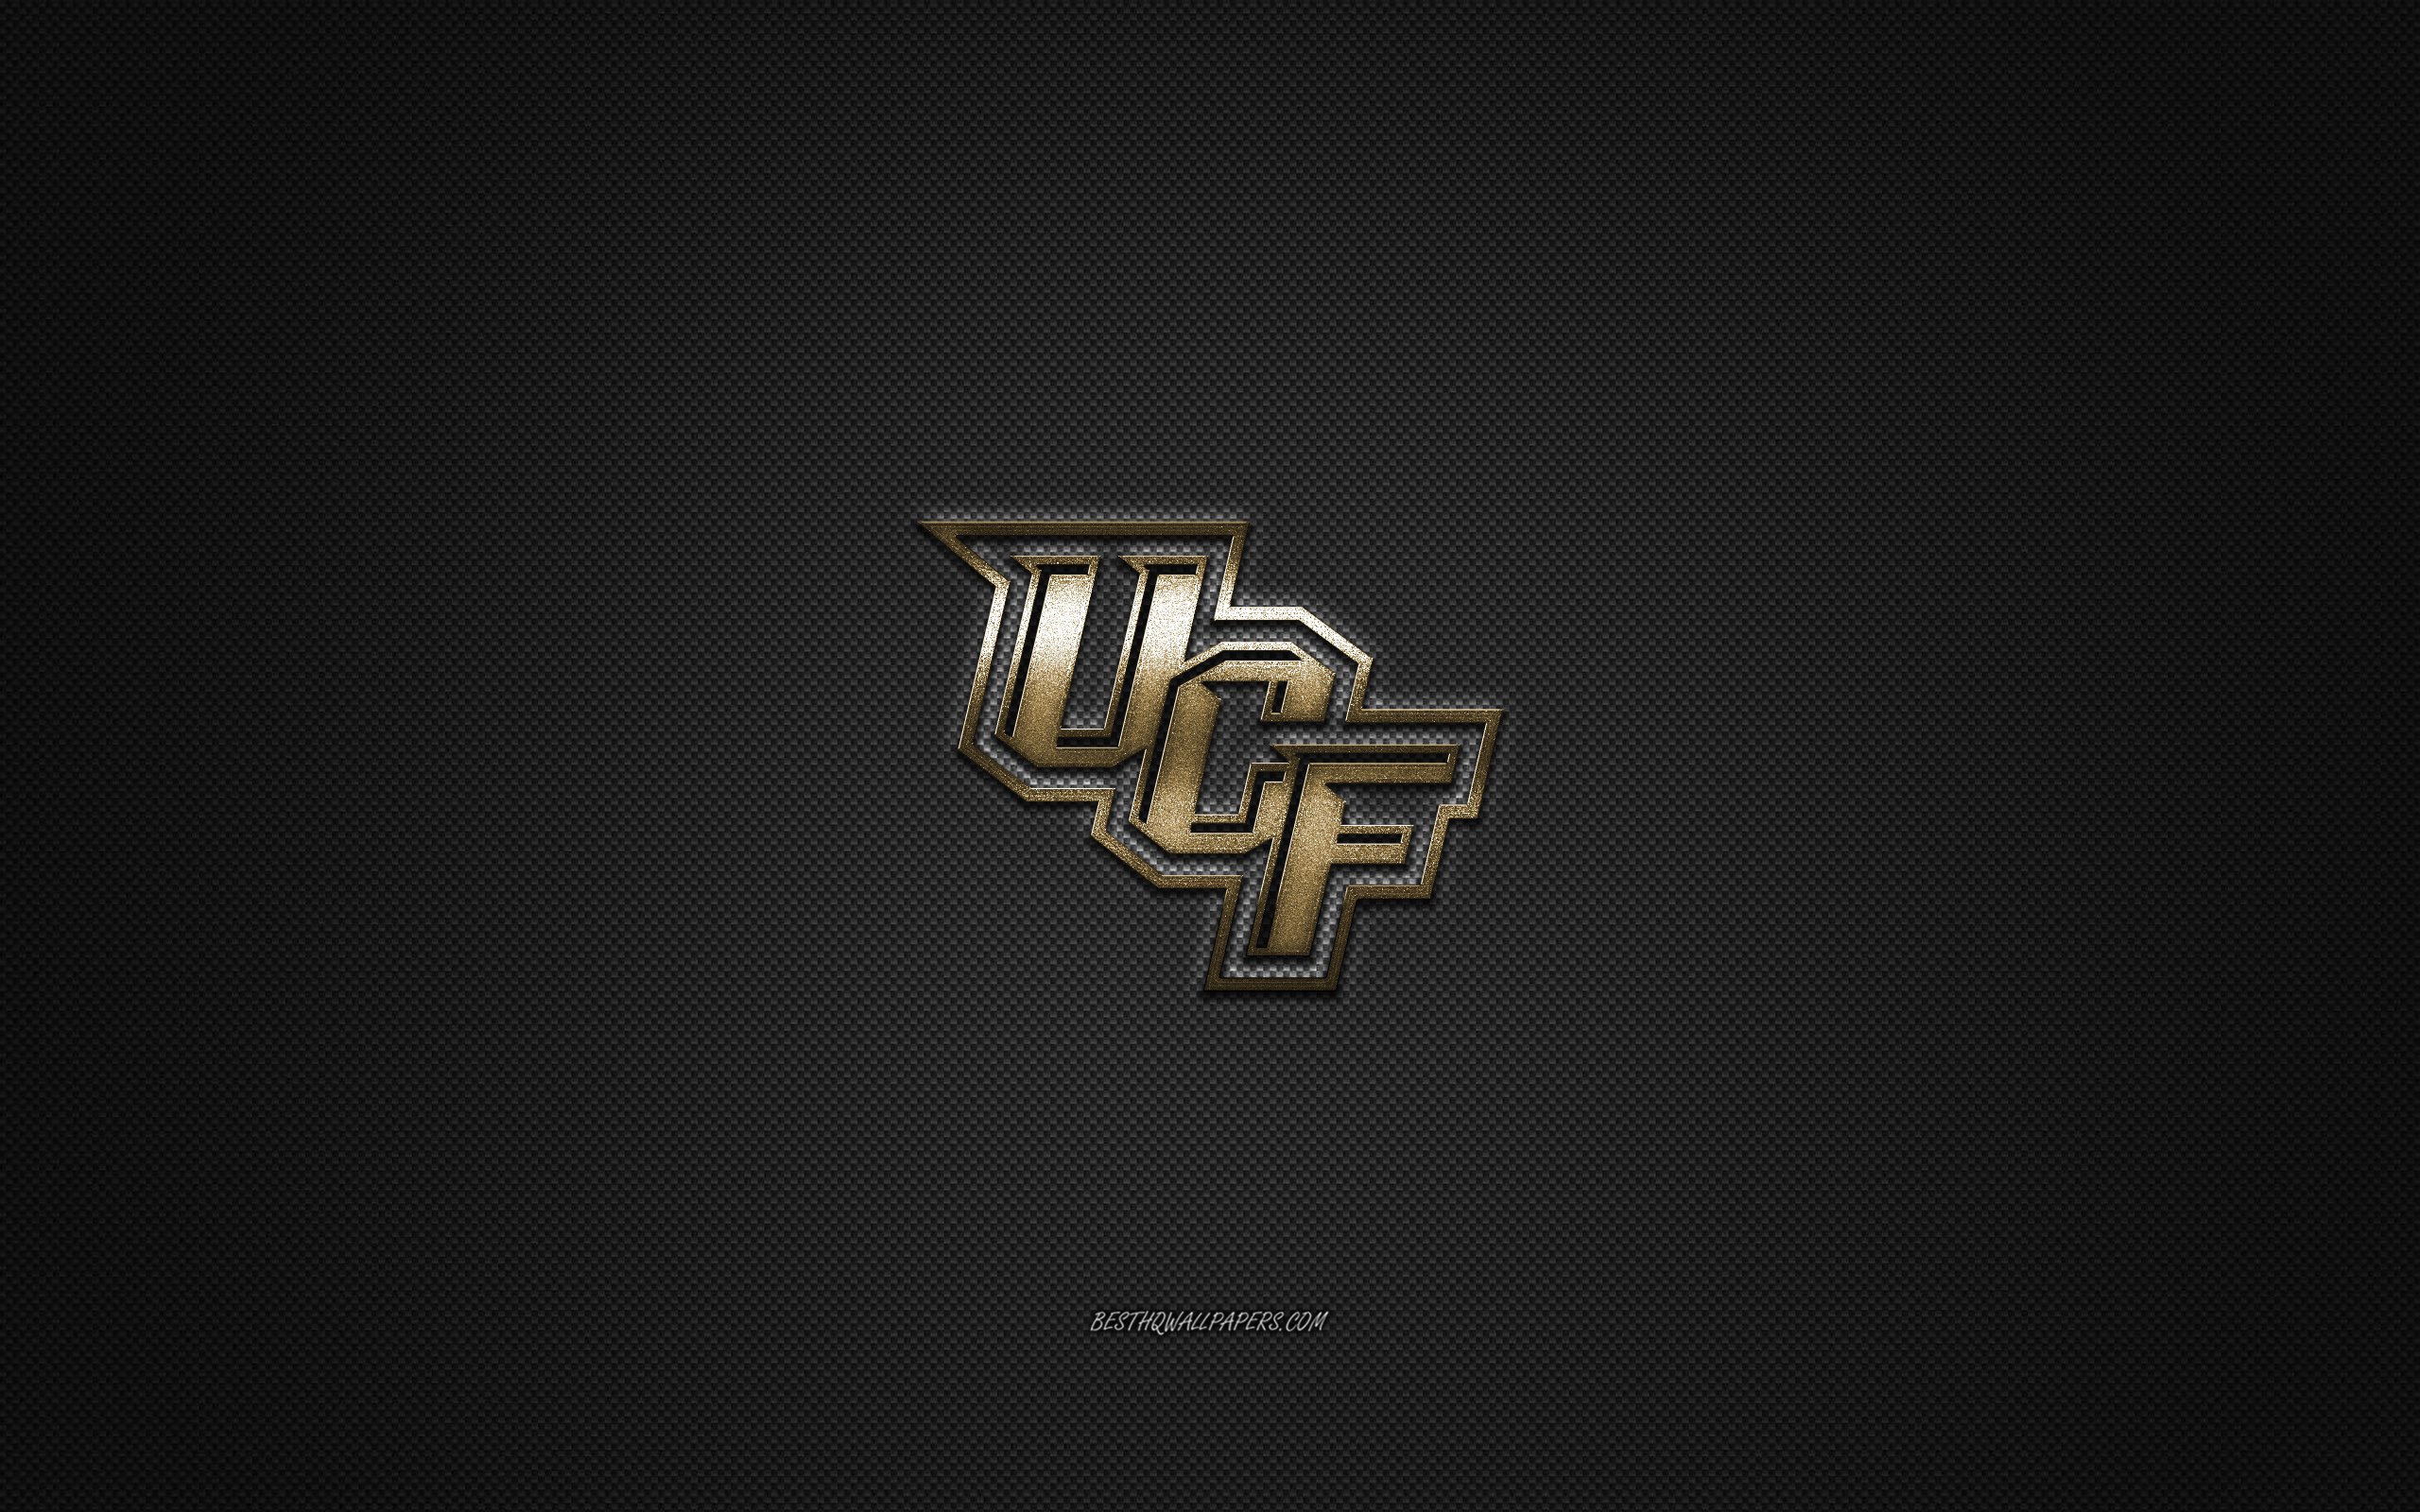 Download wallpapers UCF Knights gray background American football team  UCF Knights emblem NCAA Florida USA American football UCF Knights logo  for desktop with resolution 2560x1600 High Quality HD pictures wallpapers